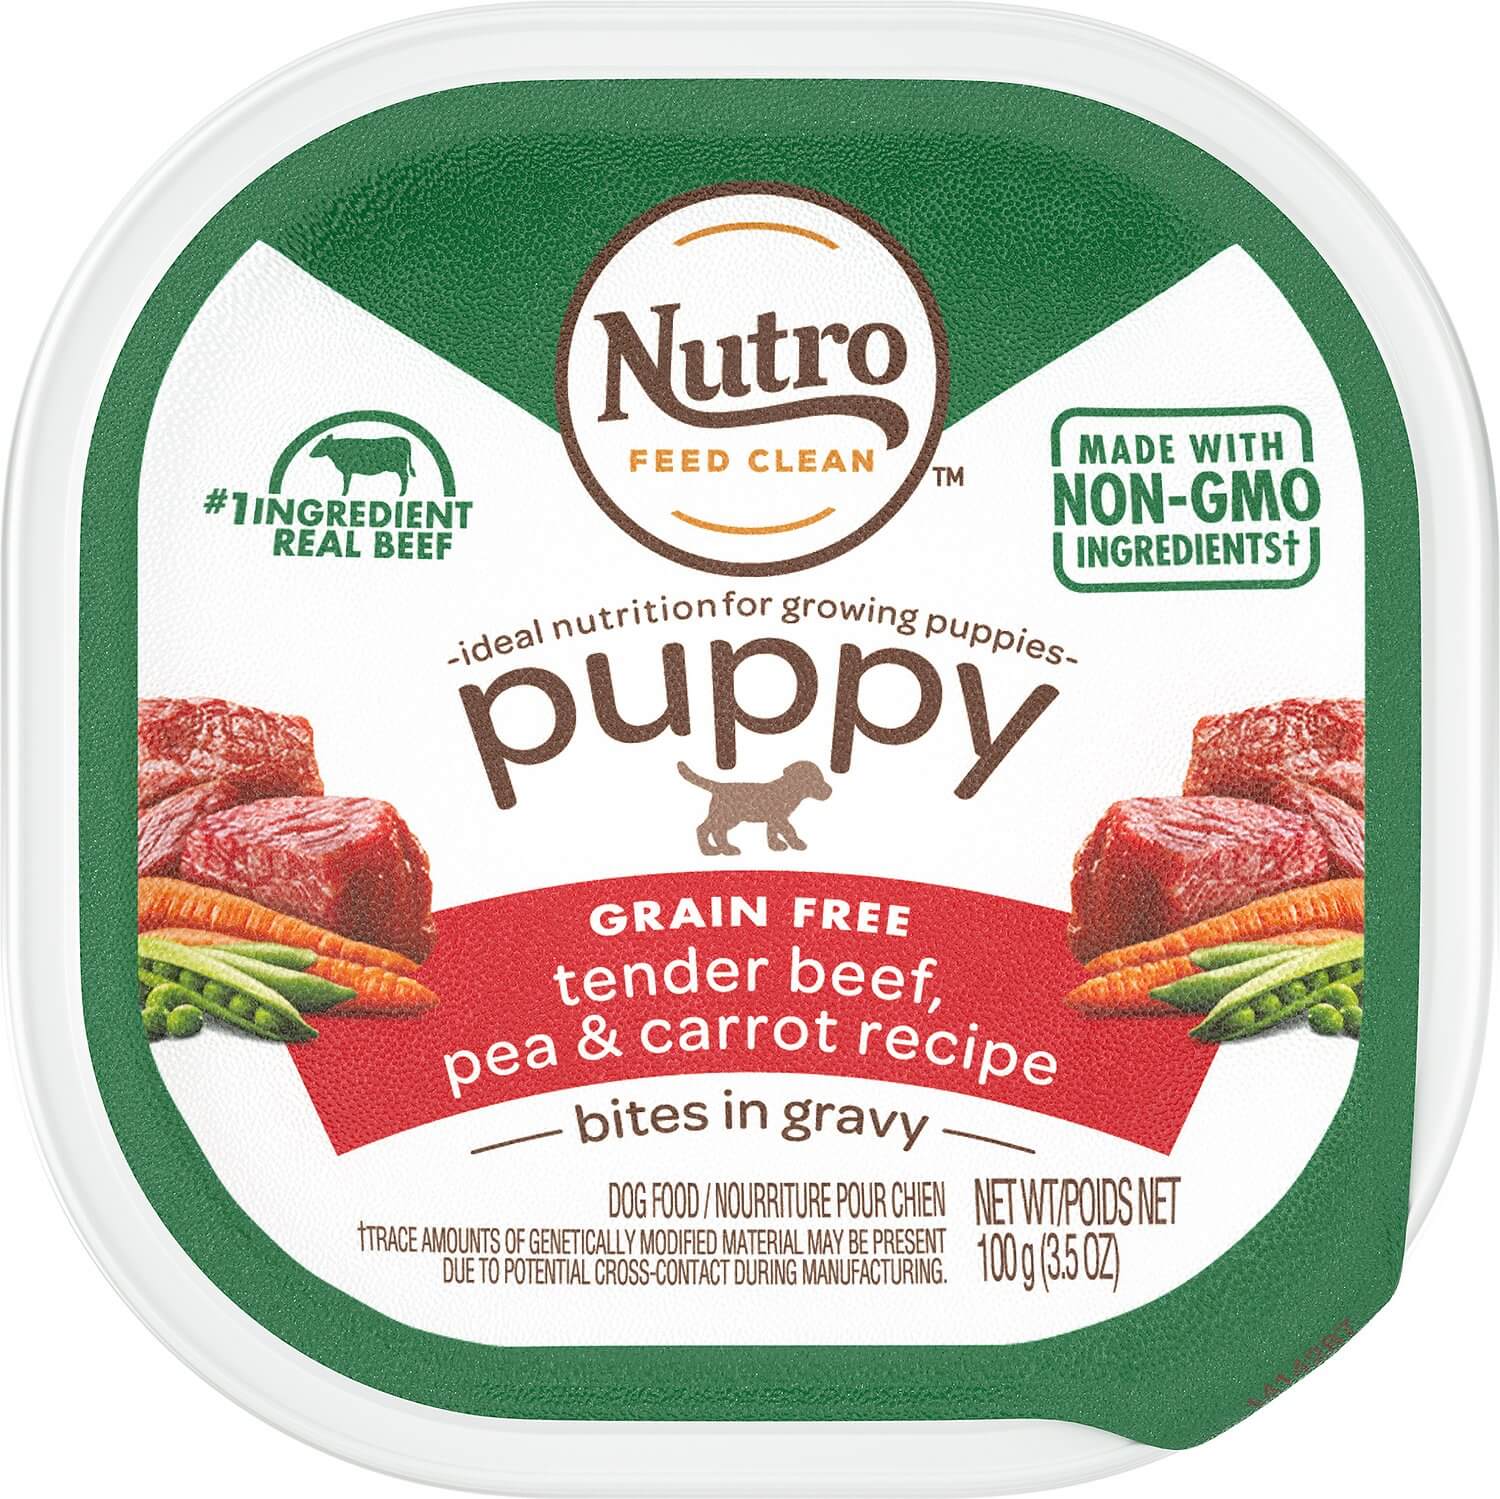 nutro-puppy-food-review-rating-recalls